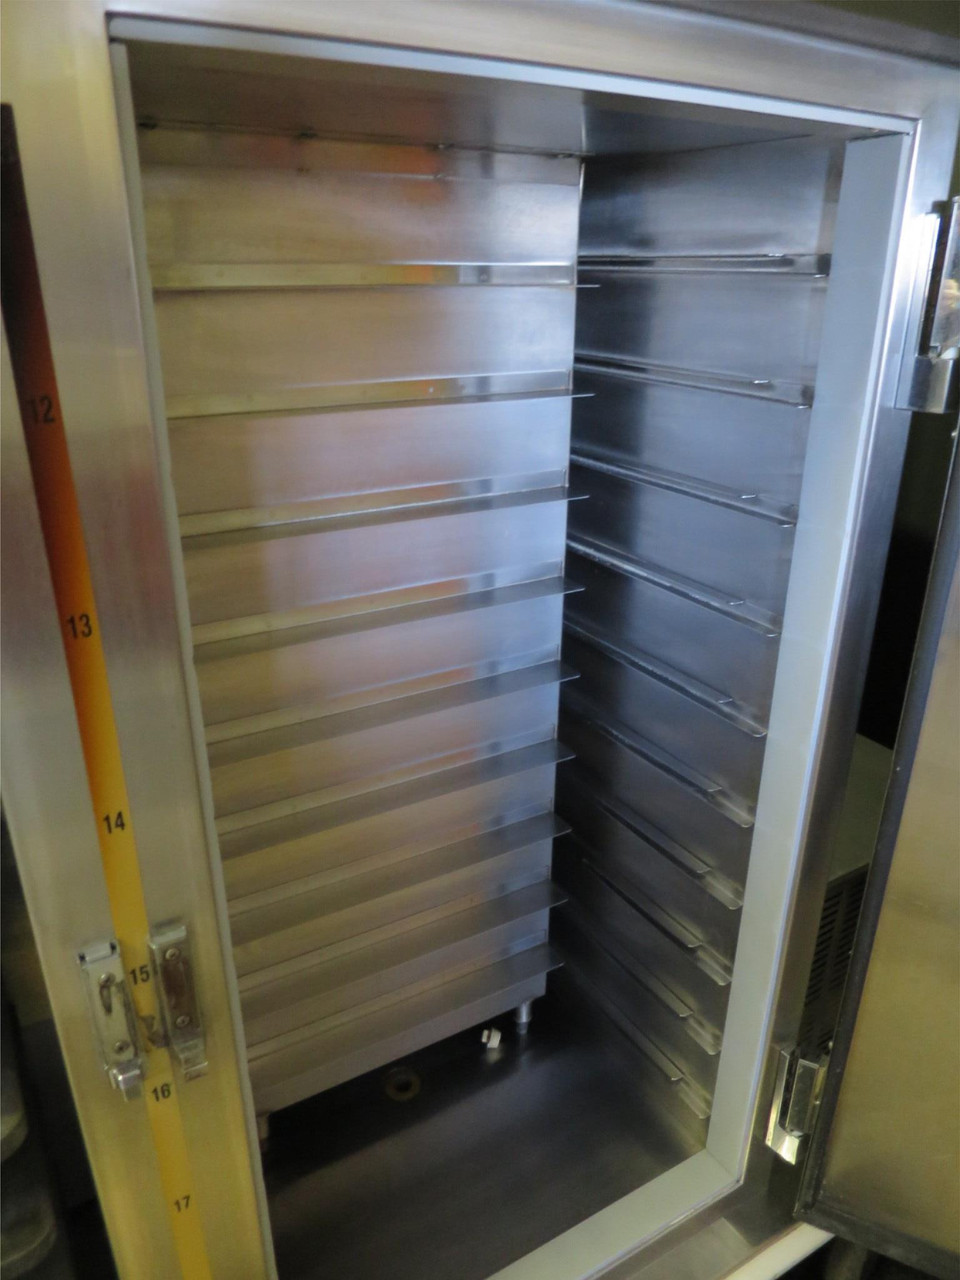 Heated & Refrigerated Meal Tray Delivery Cart  Piper Products